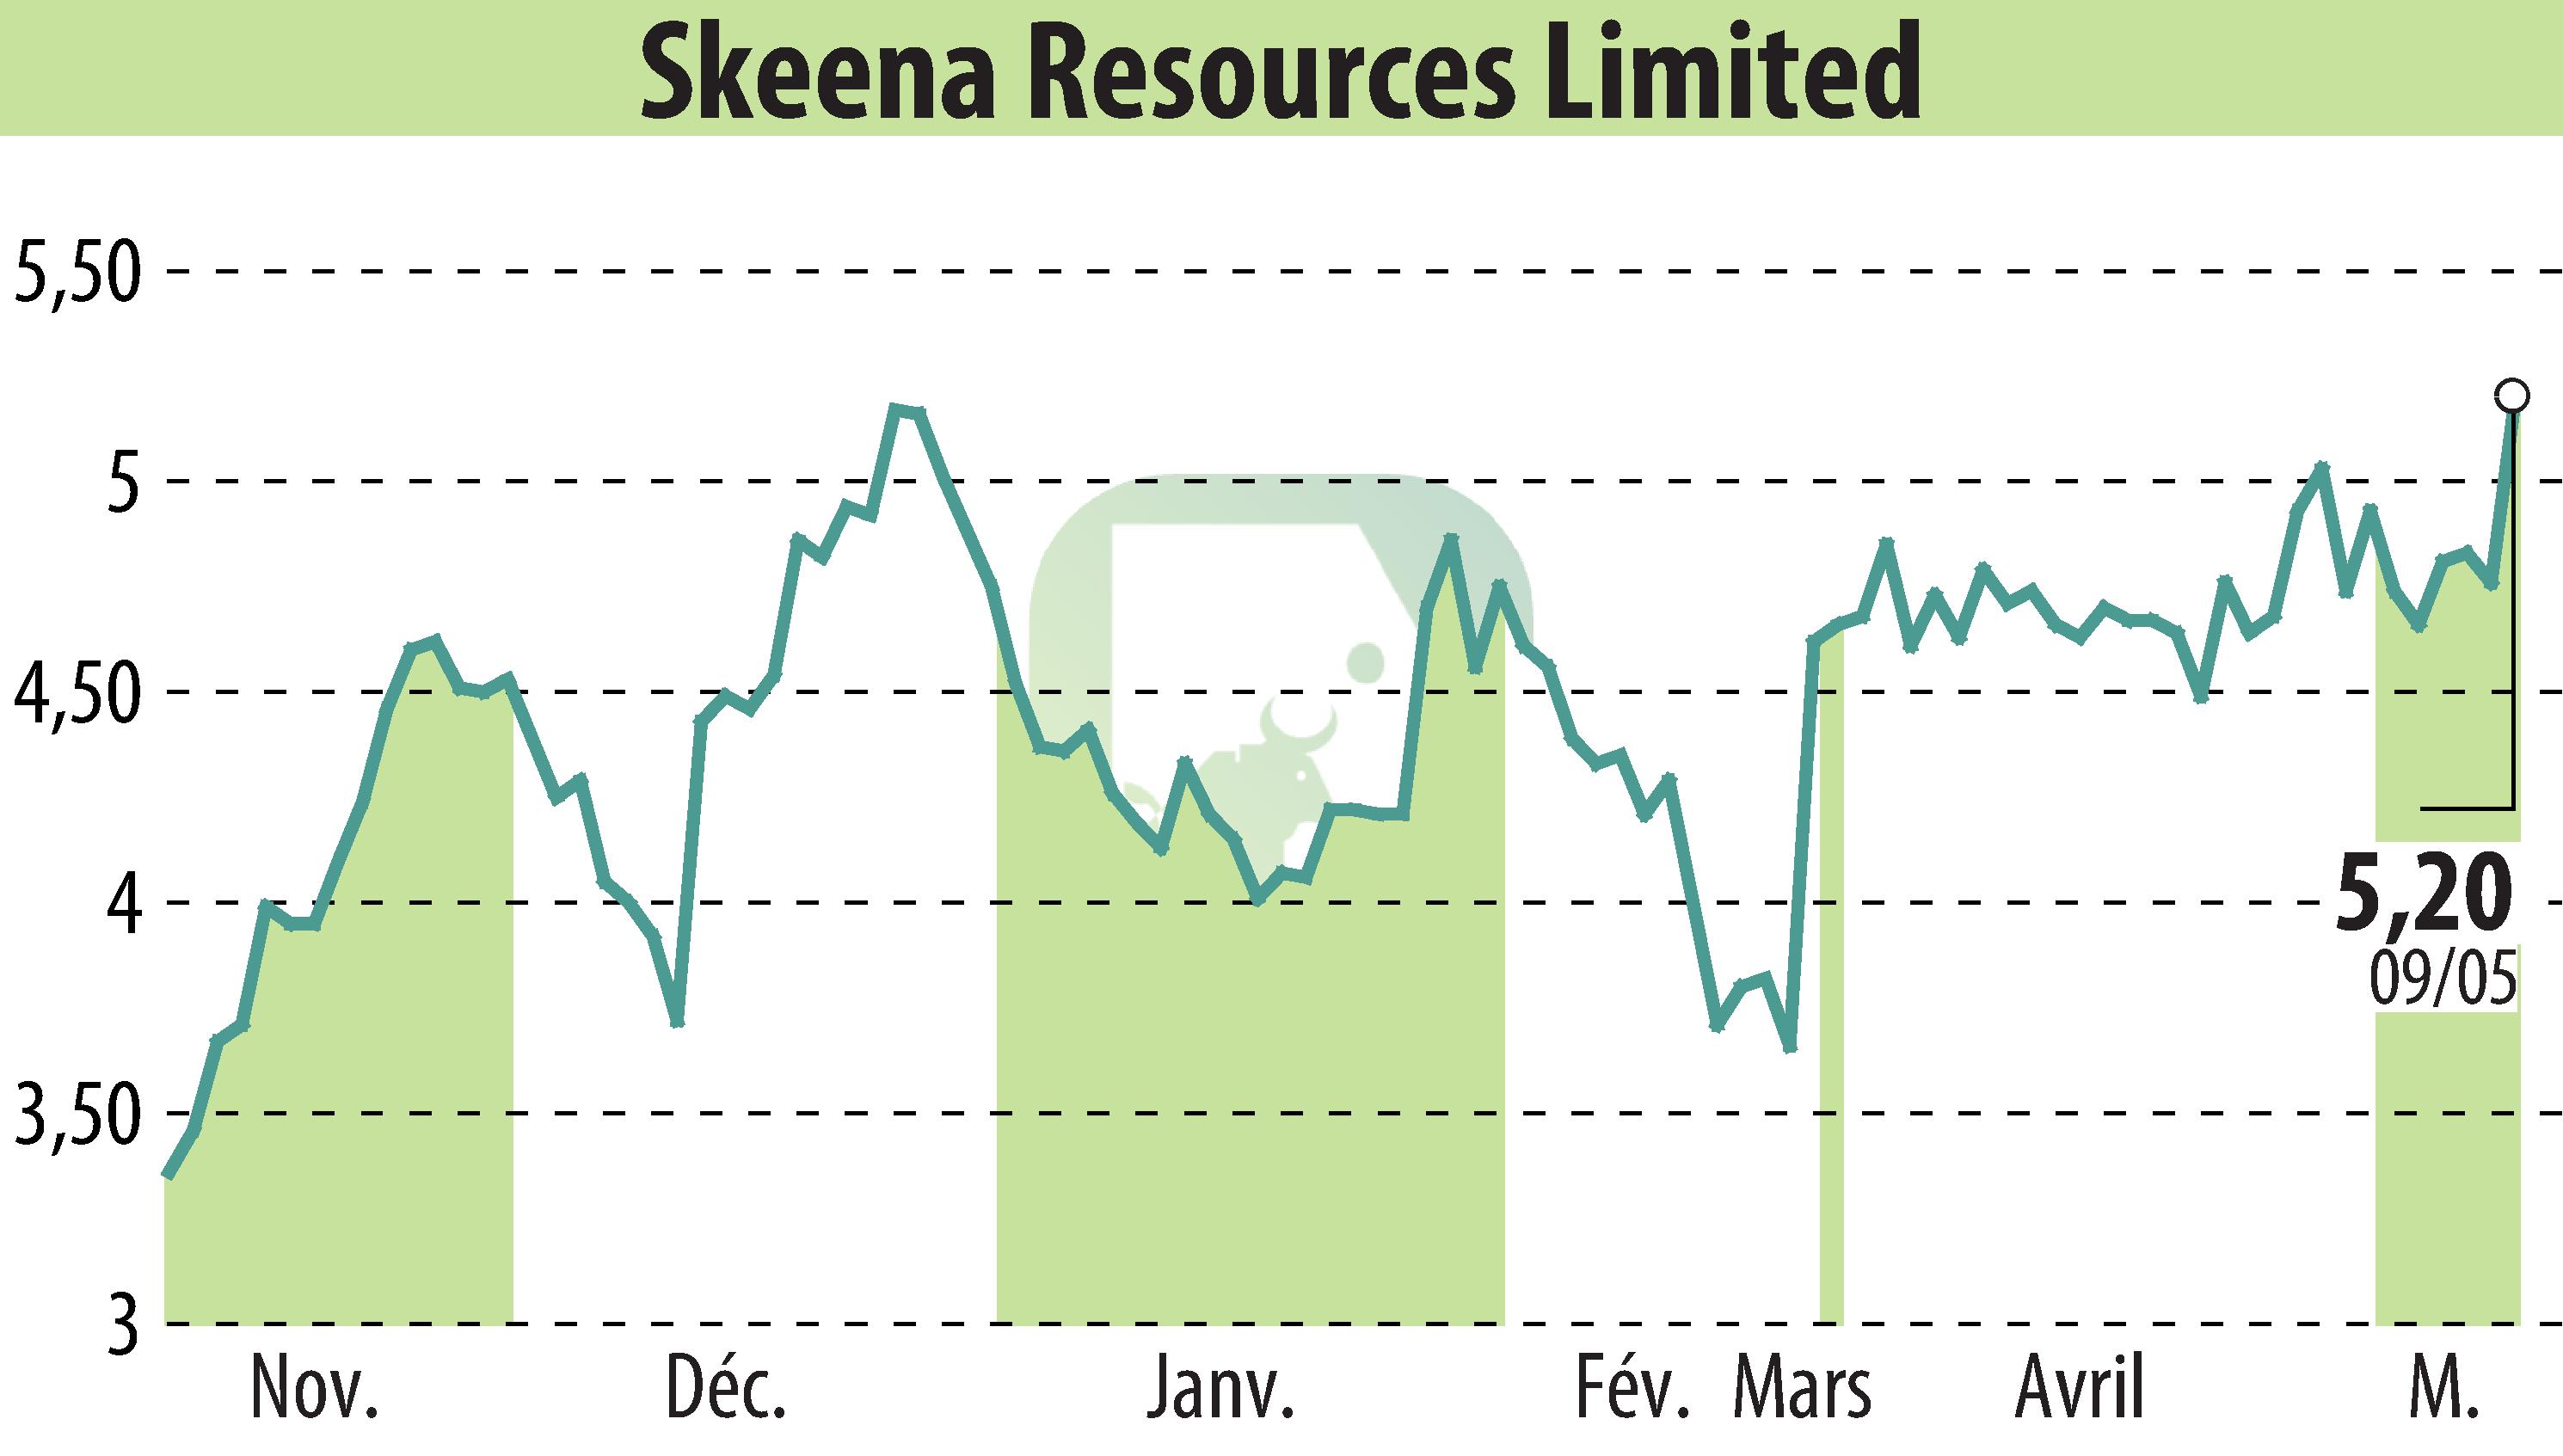 Stock price chart of Skeena Resources Limited (EBR:SKE) showing fluctuations.